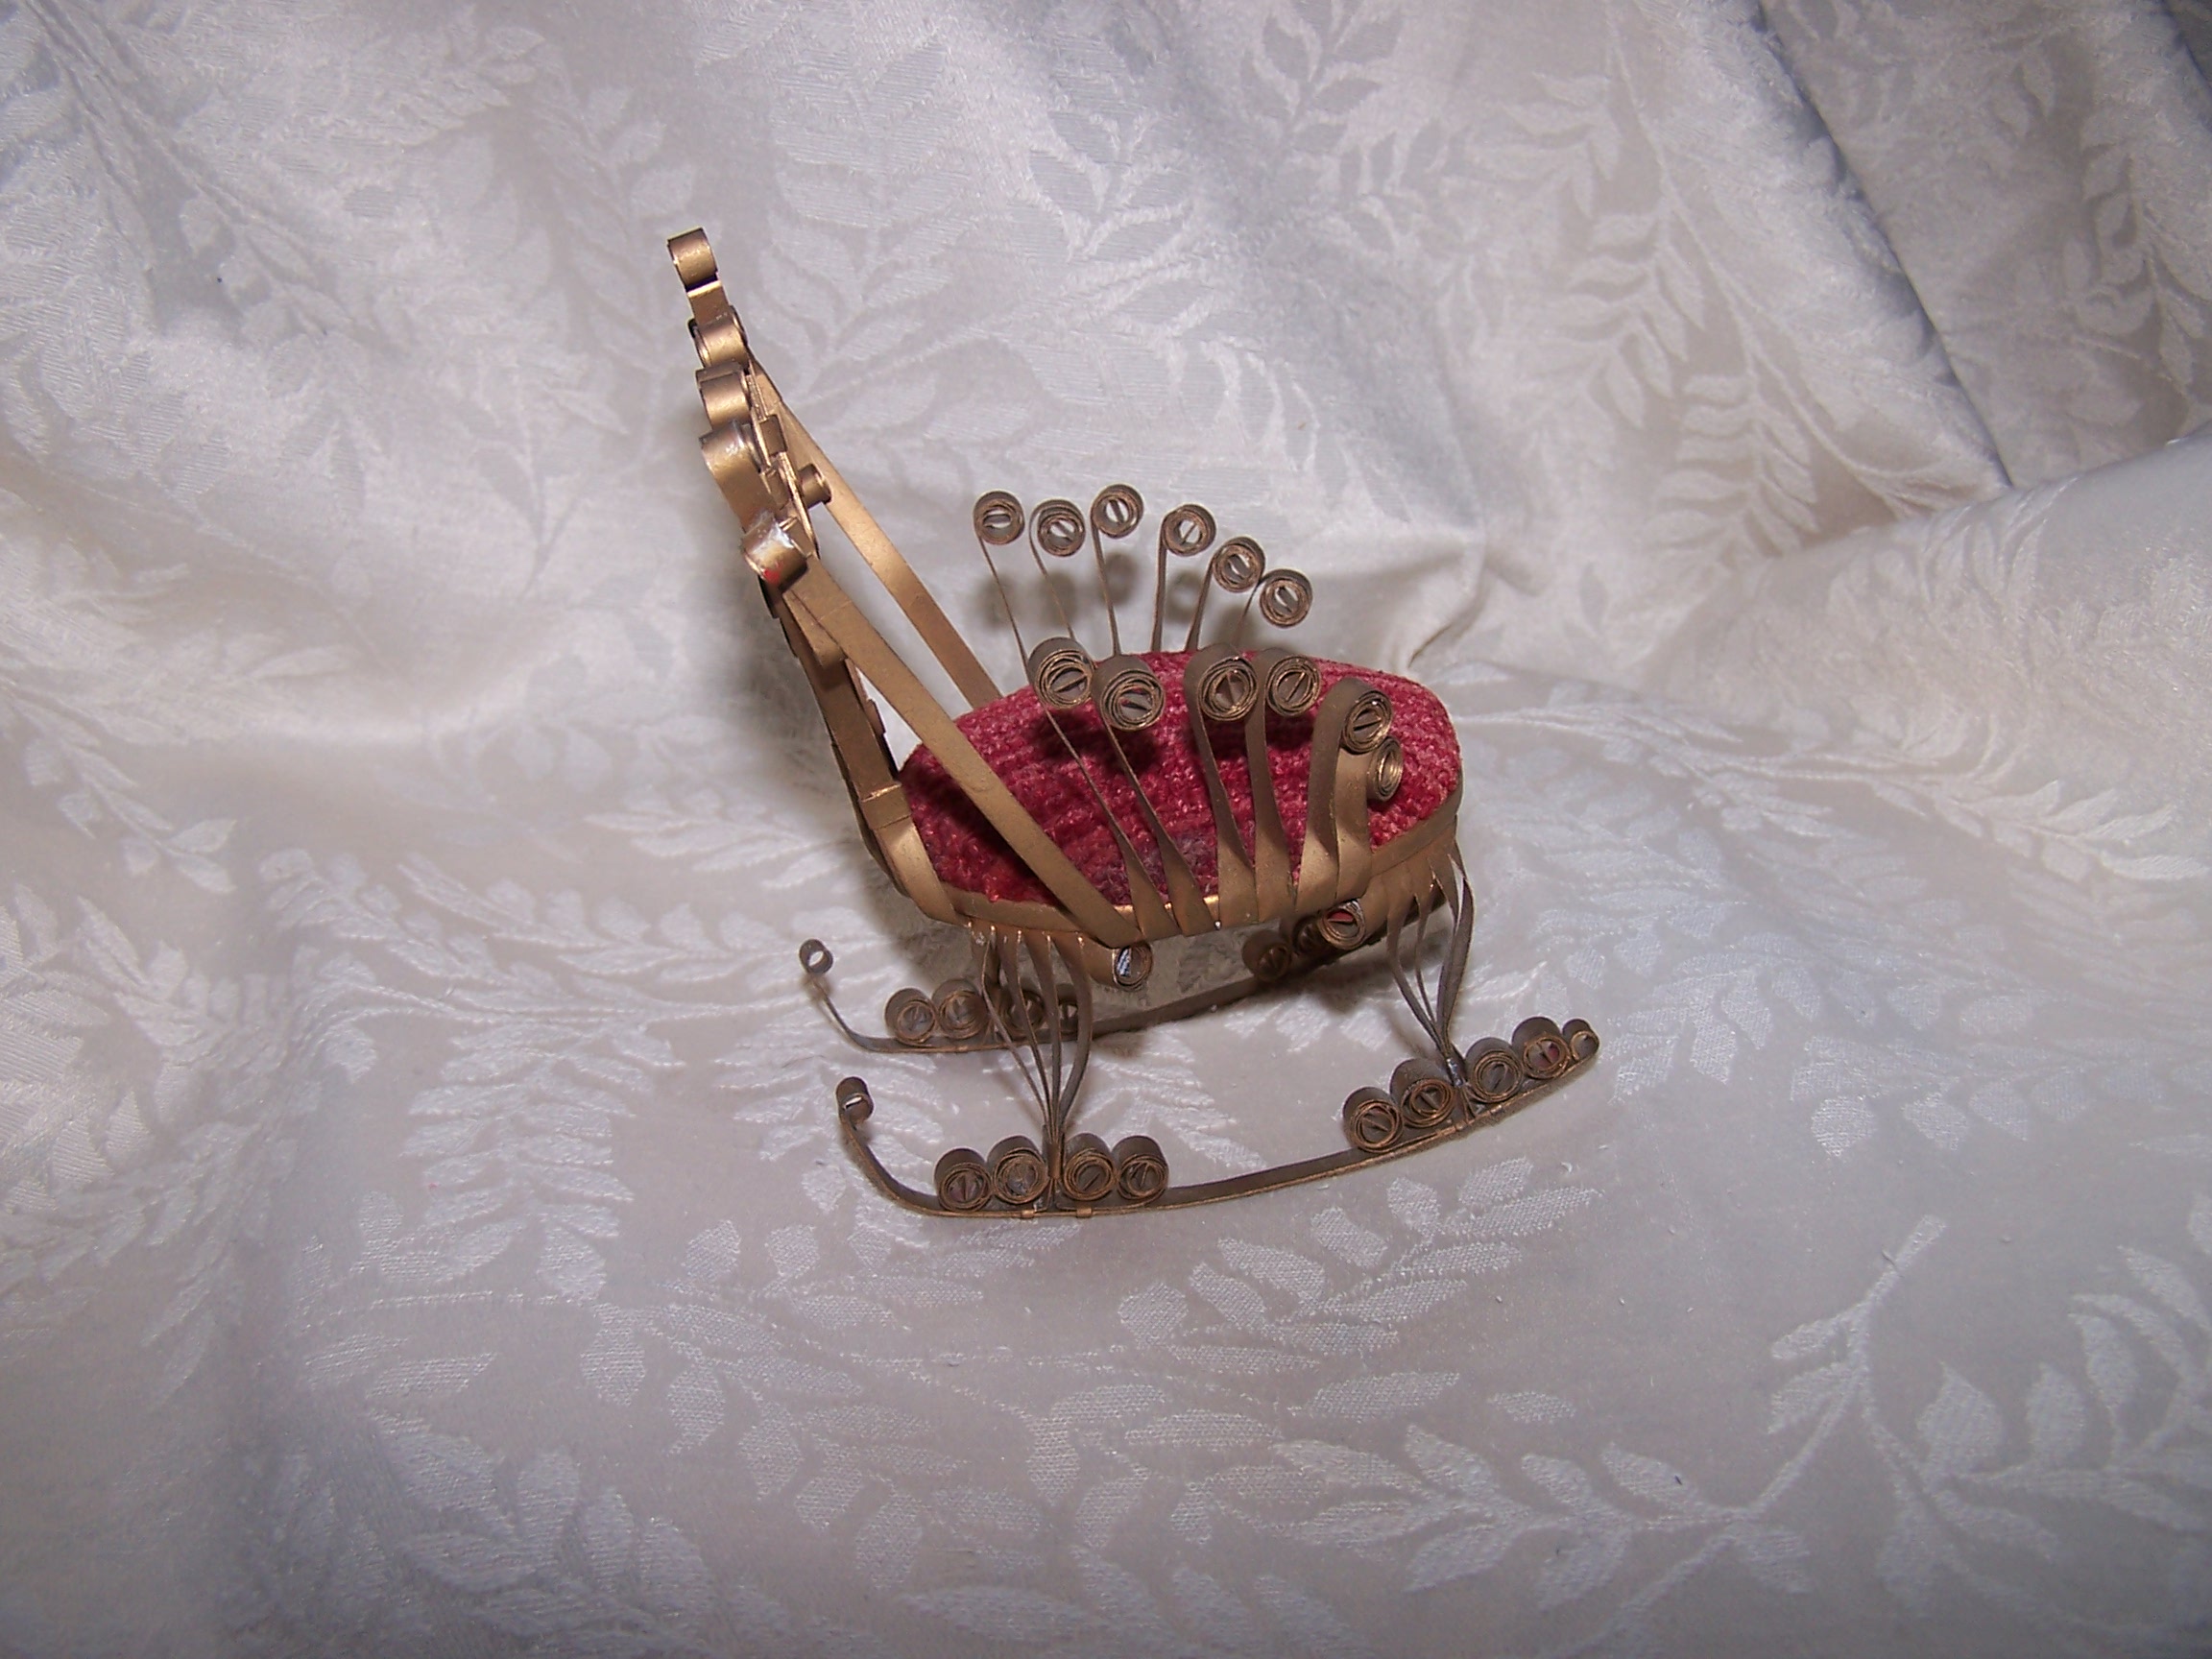 Image 2 of Quilled Pin Cushion Rocking Chair, Gold, Red Plush, Vintage